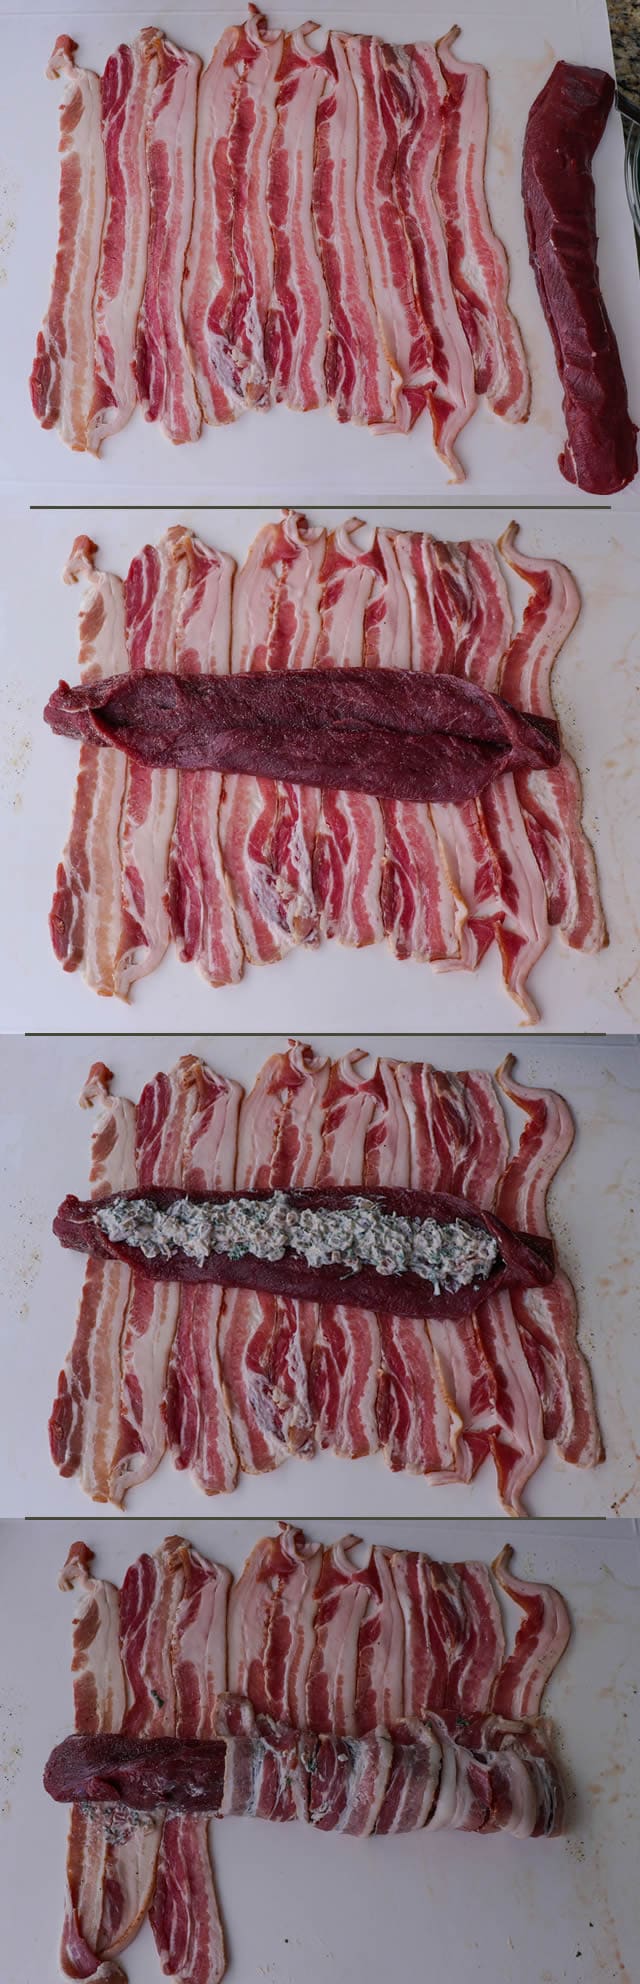 How to Make Real Venison Bacon